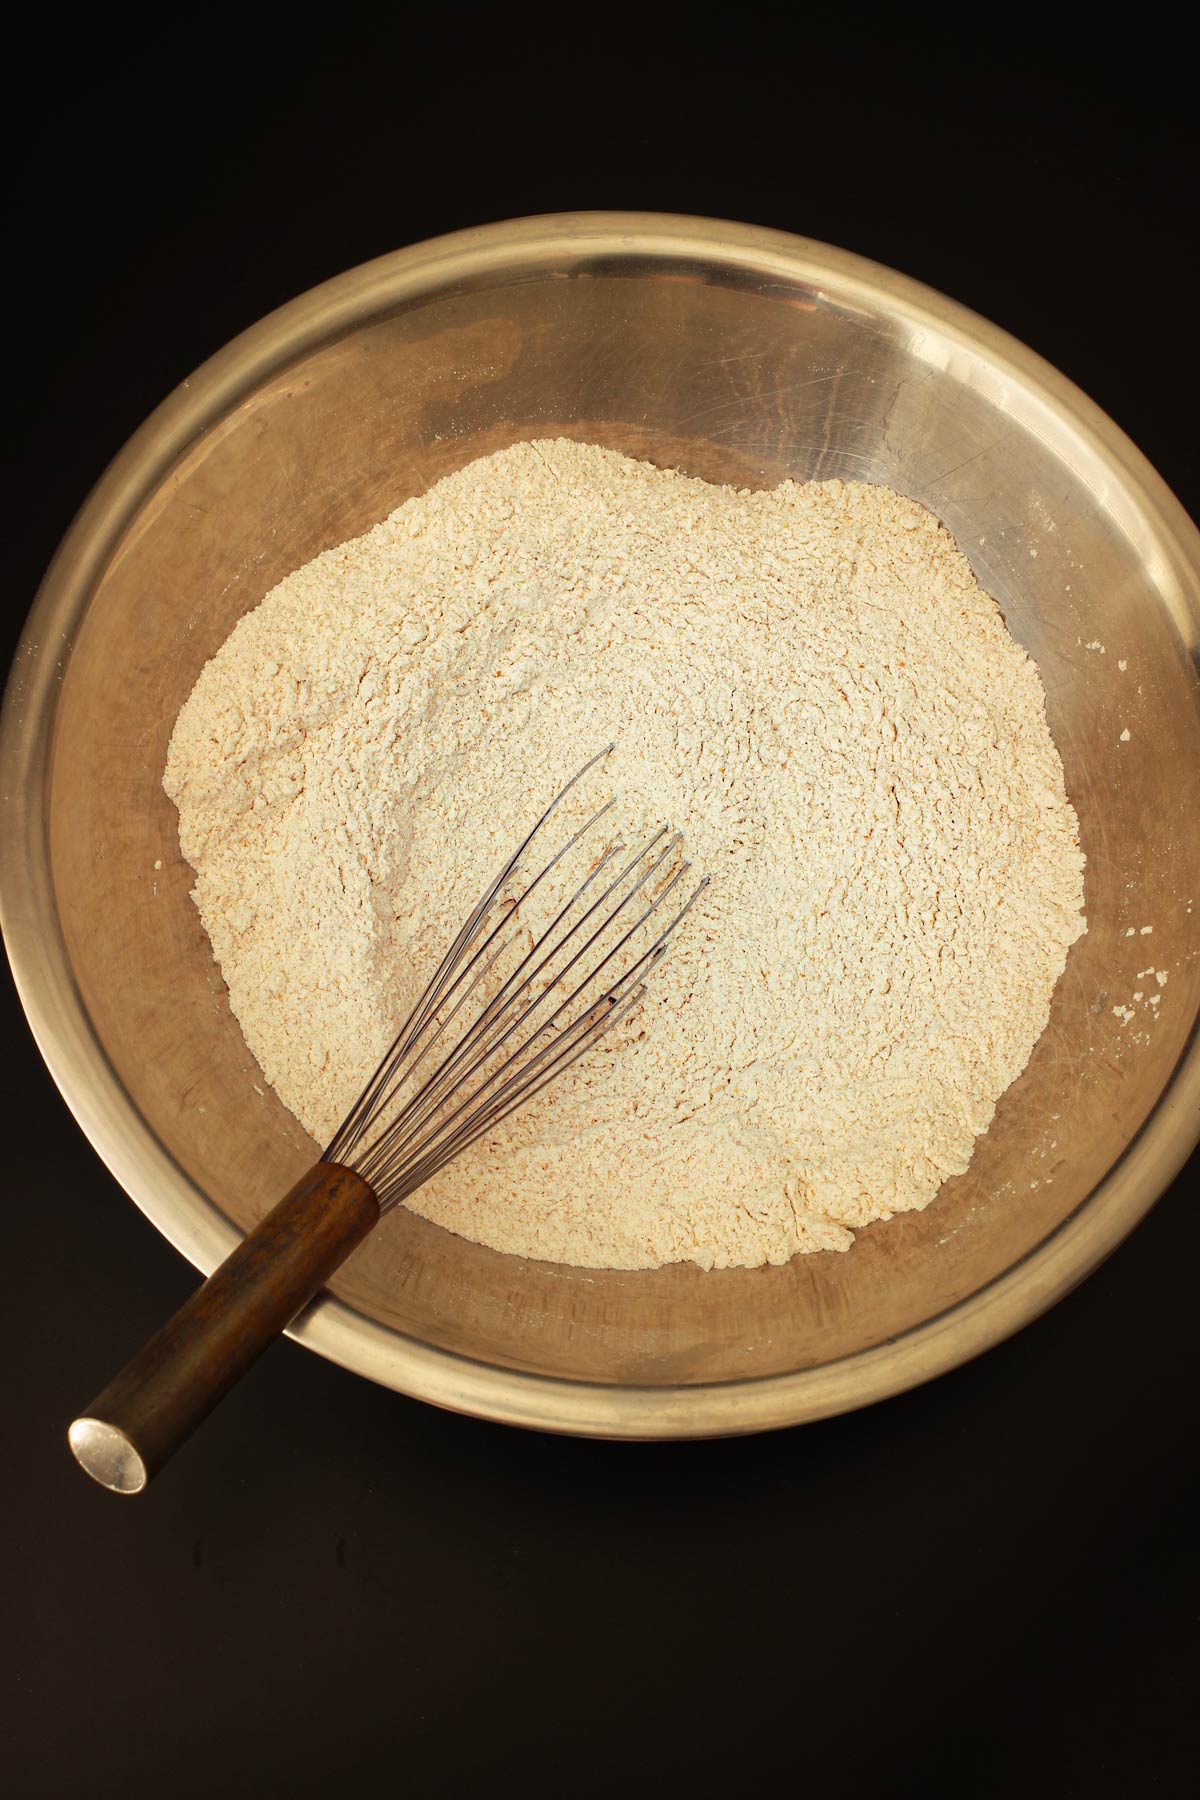 dry ingredients whisked together in large metal mixing bowl.